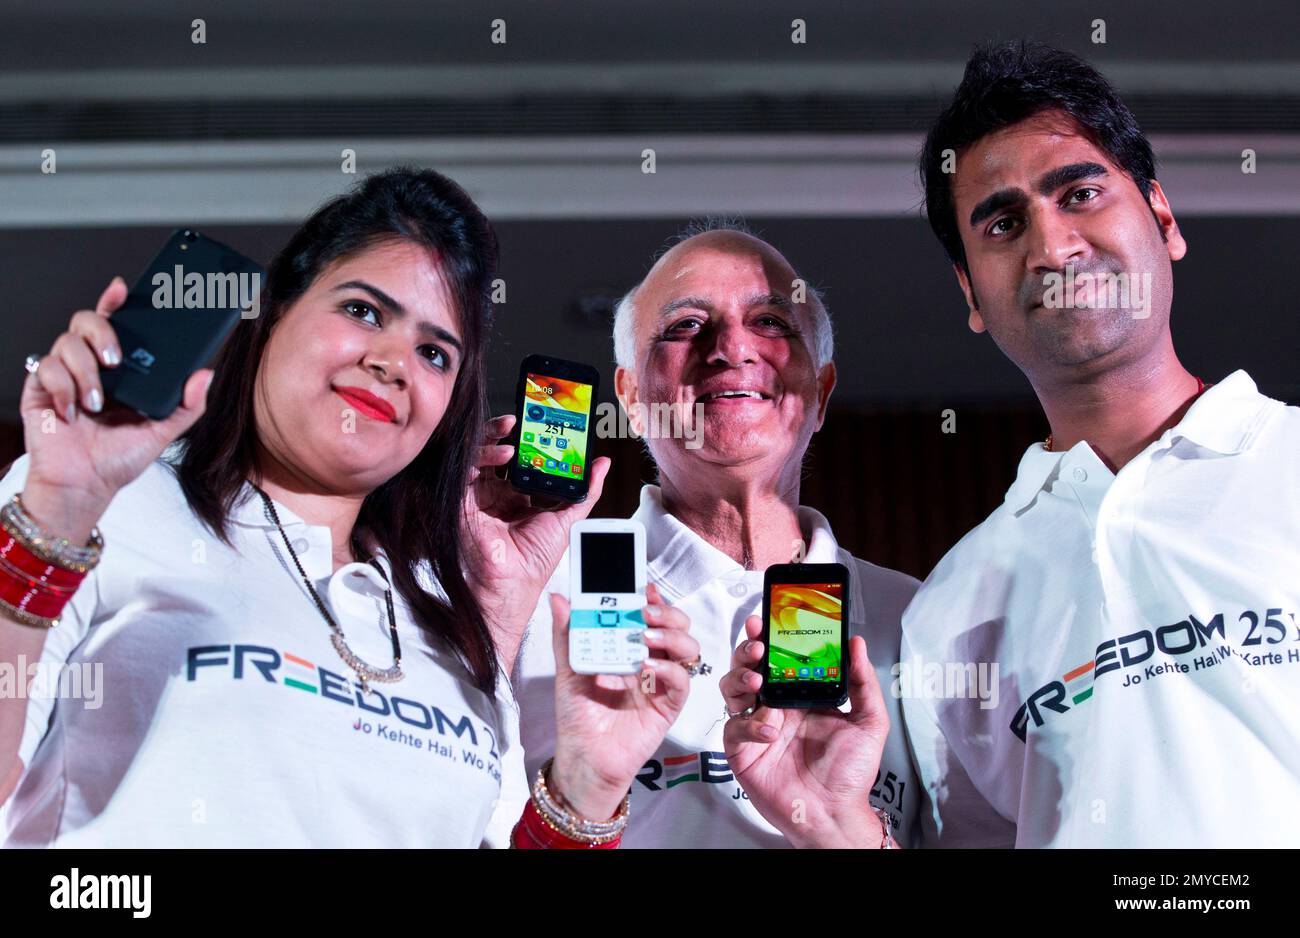 Freedom 251 Smartphone 'Biggest Scam of Millennium', Says Congress MP |  Technology News